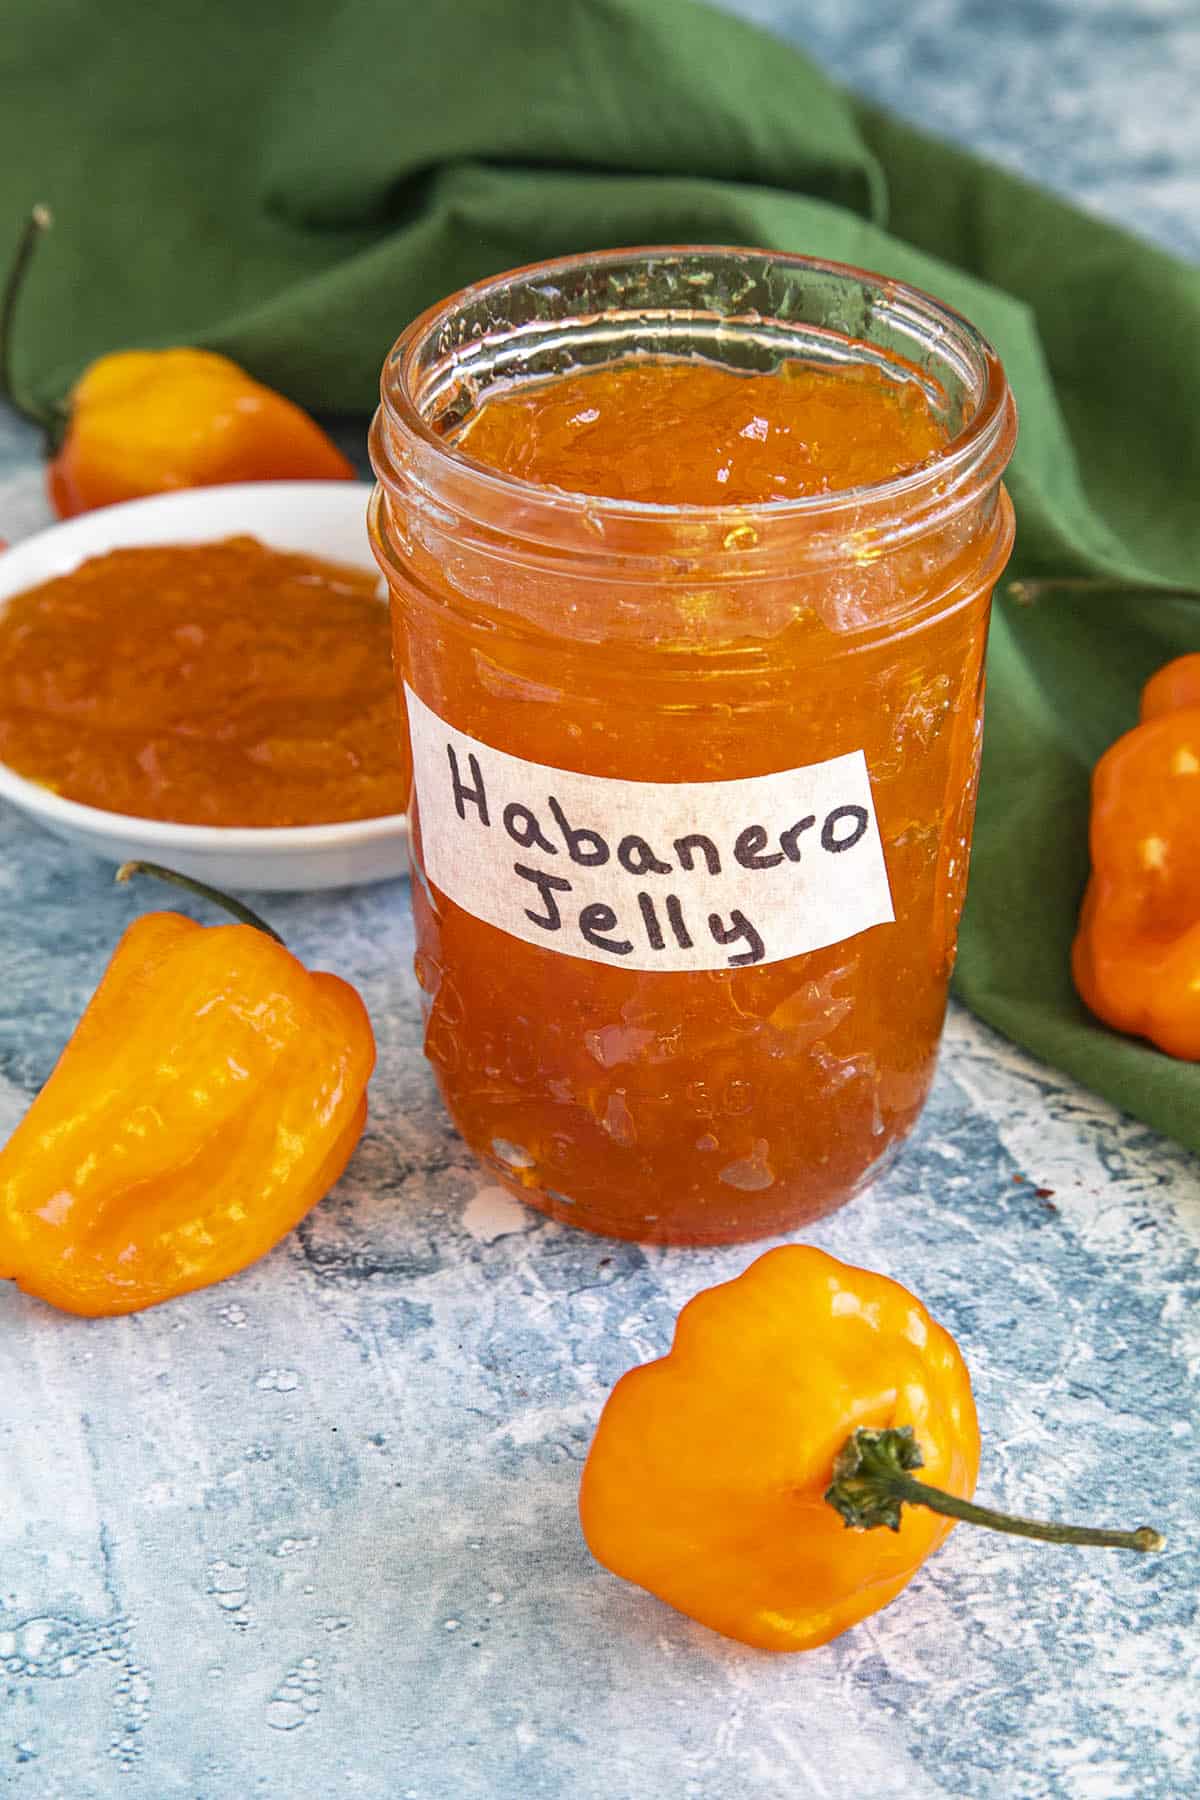 Habanero Jelly in a jar